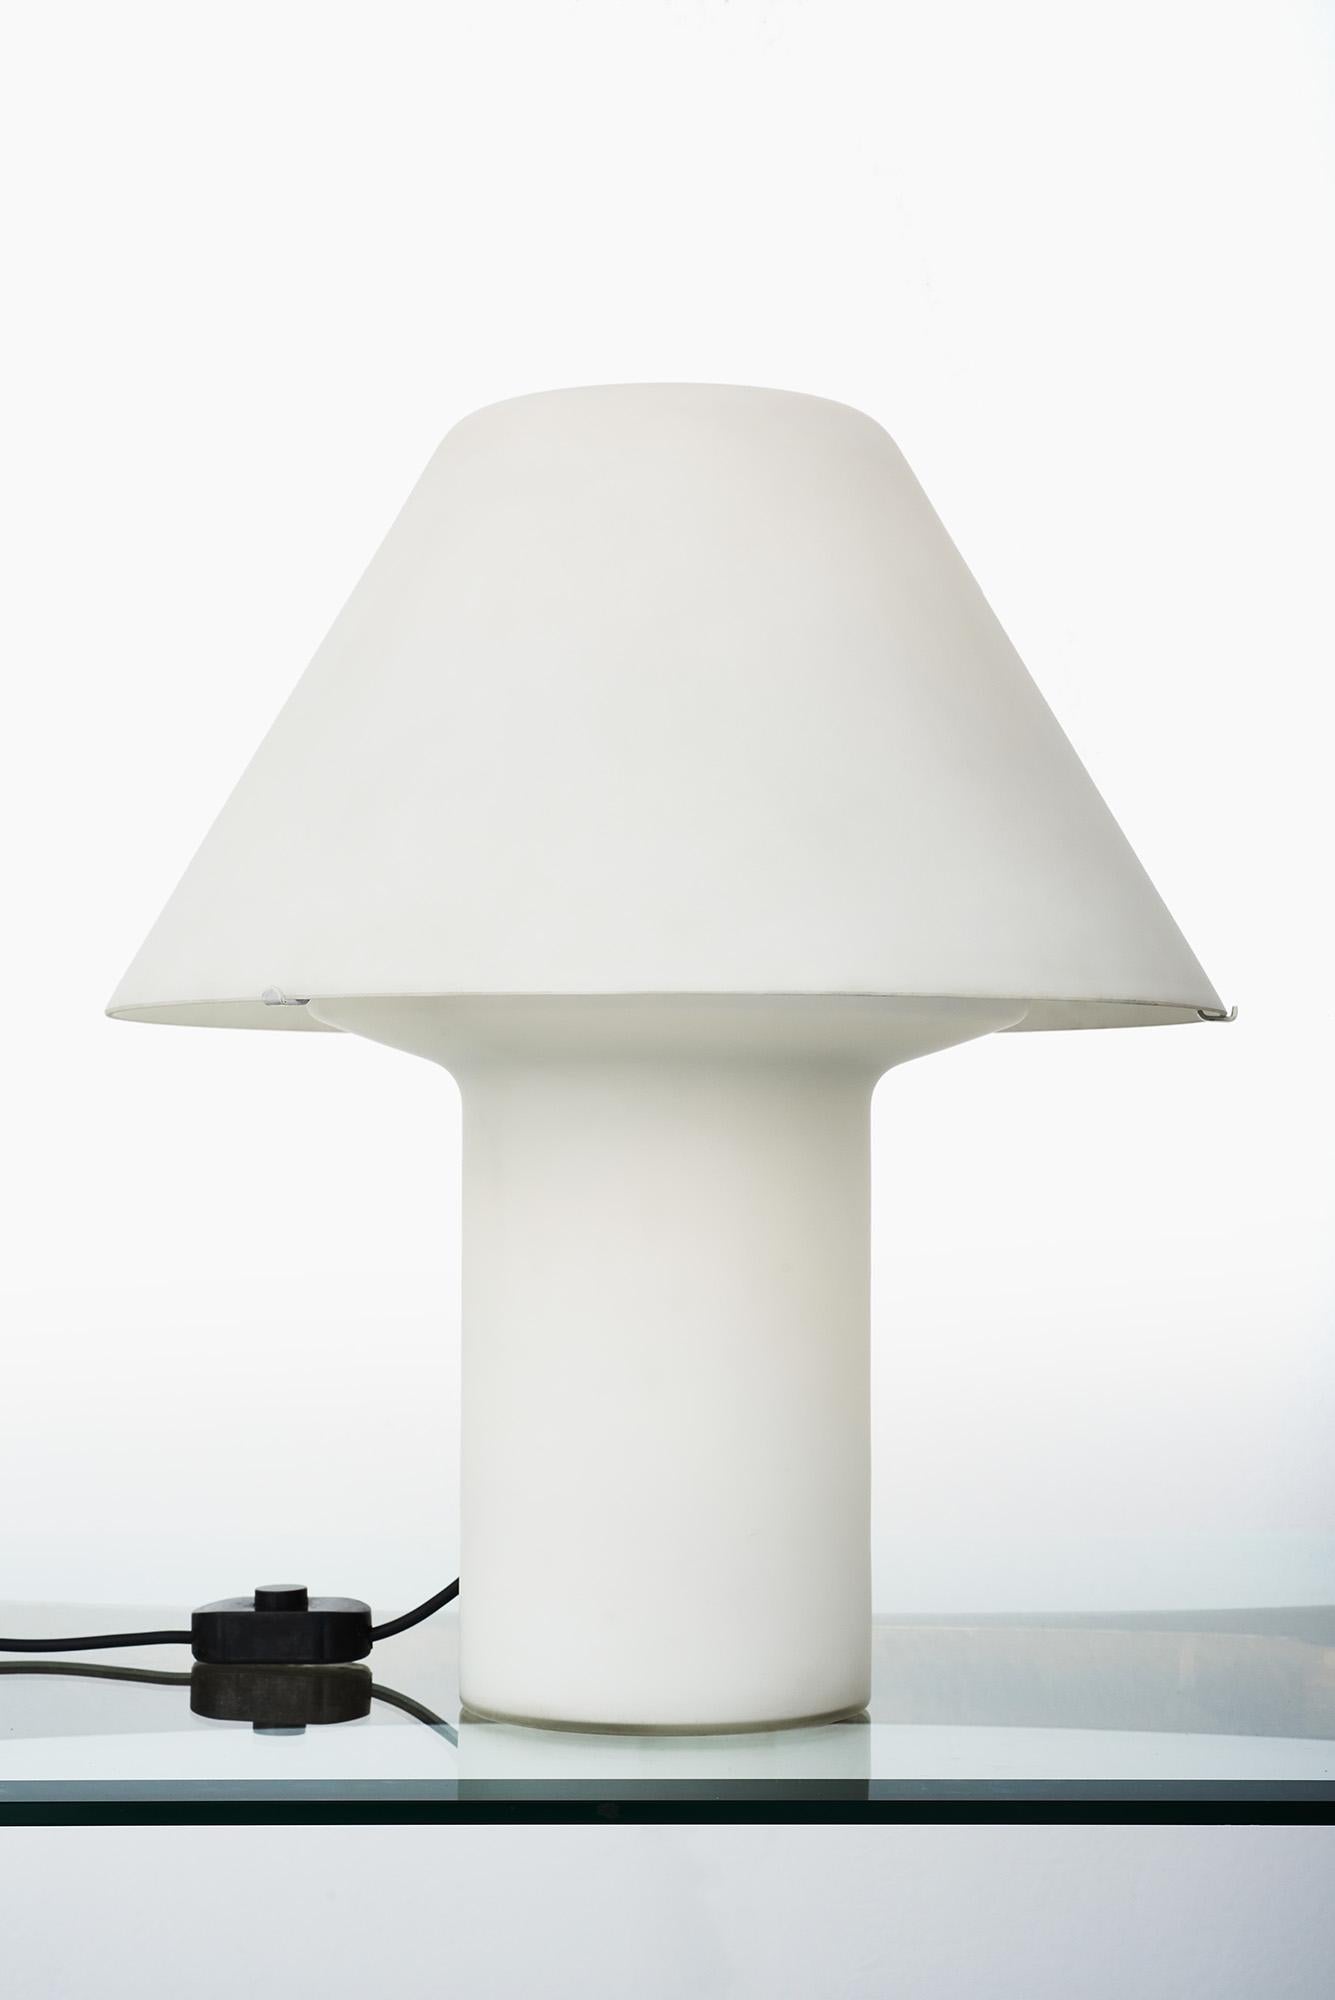 Sleek and chic frosted opal glass mushroom table lamp with Achille & Pier Giacomo Castiglioni switch, Italy 1970s.